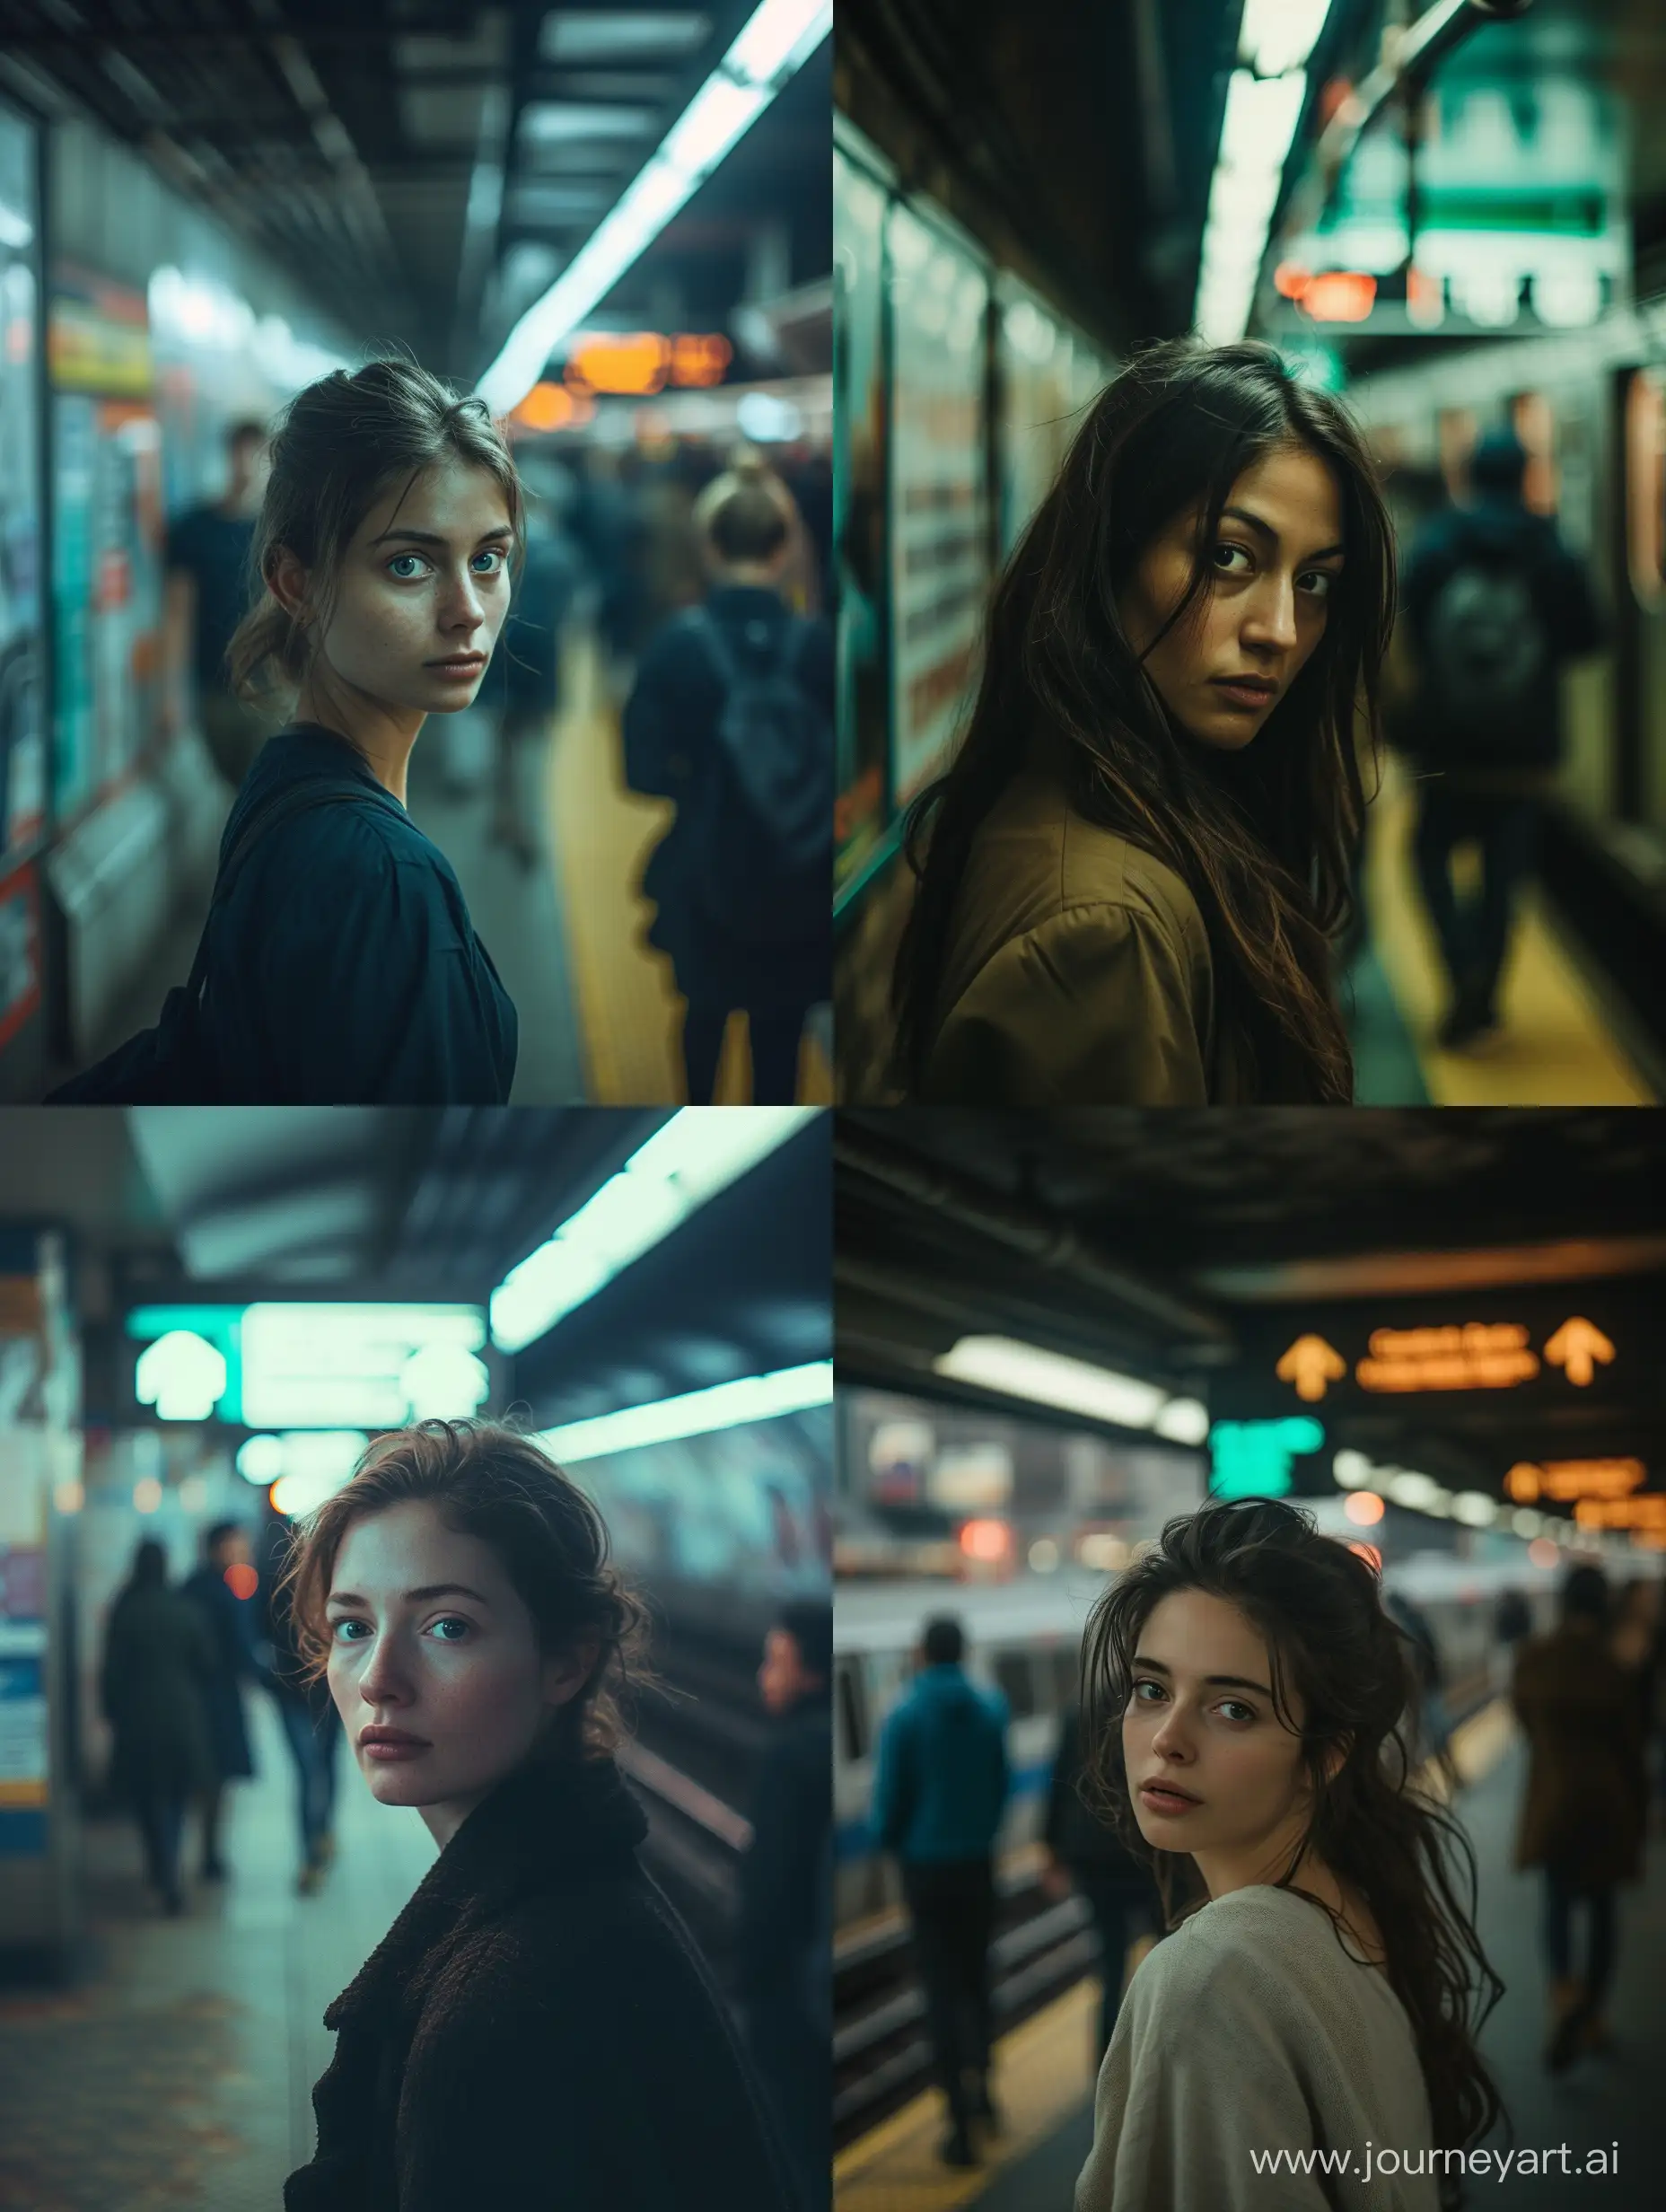 A cinematic composition of a woman in a subway station, arranged according to the golden ratio. The color scheme is stable and subdued, contributing to a tranquil atmosphere. The woman is gazing into the camera with a sad and contemplative expression, reflecting a sense of melancholy amidst the urban setting. The background is a softened blur of commuters and subway signage, capturing the essence of city life. Soft lighting gently highlights the woman's features.